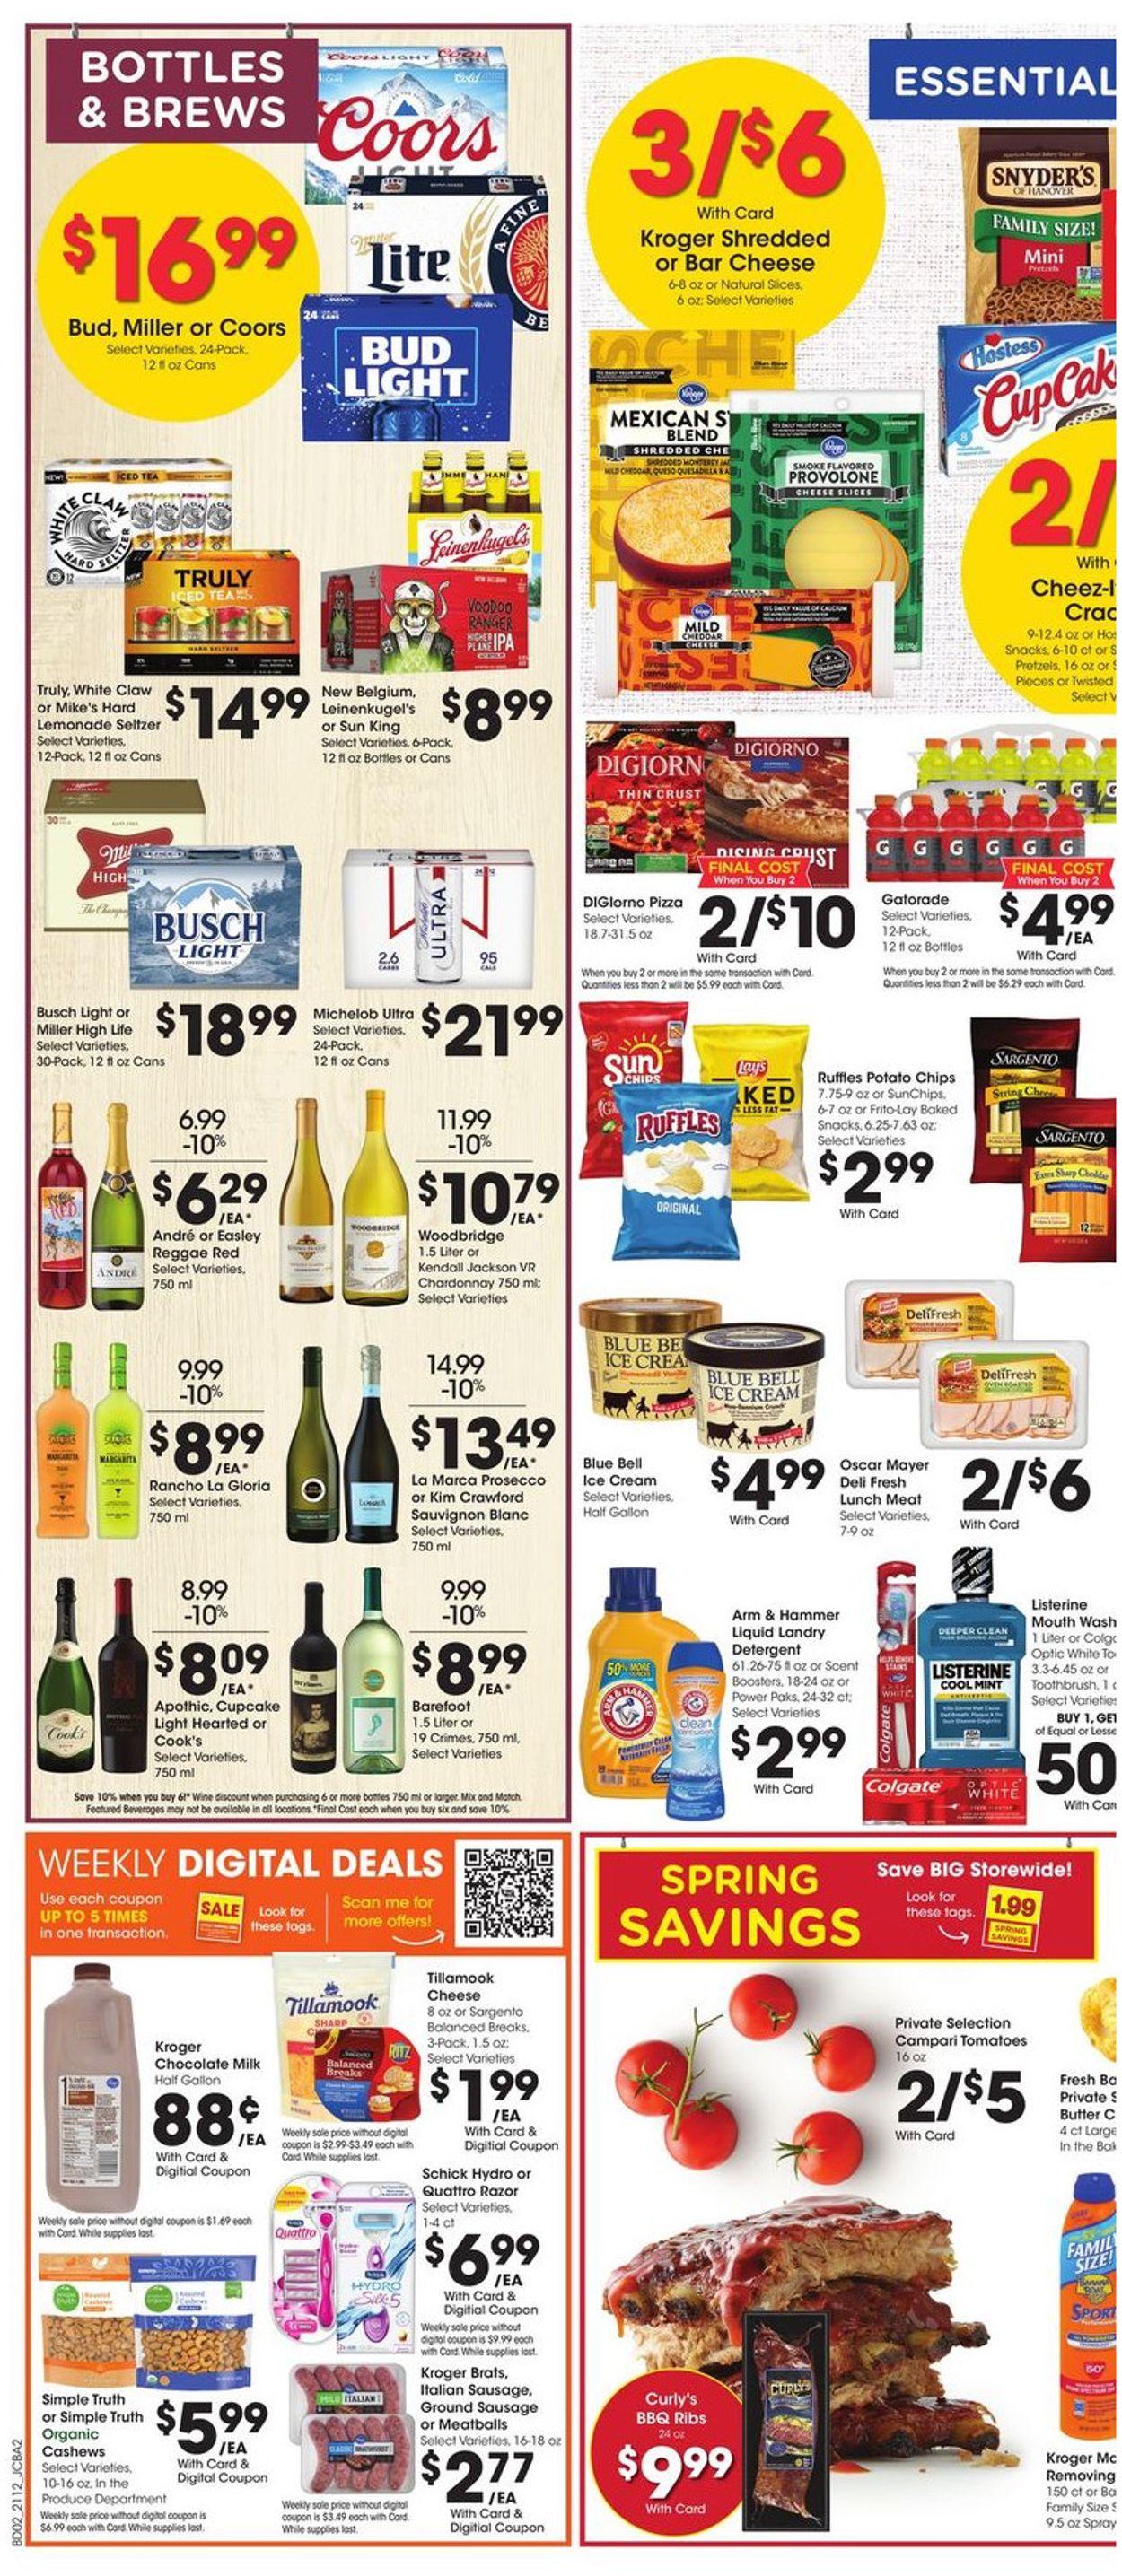 Catalogue Jay C Food Stores from 04/21/2021